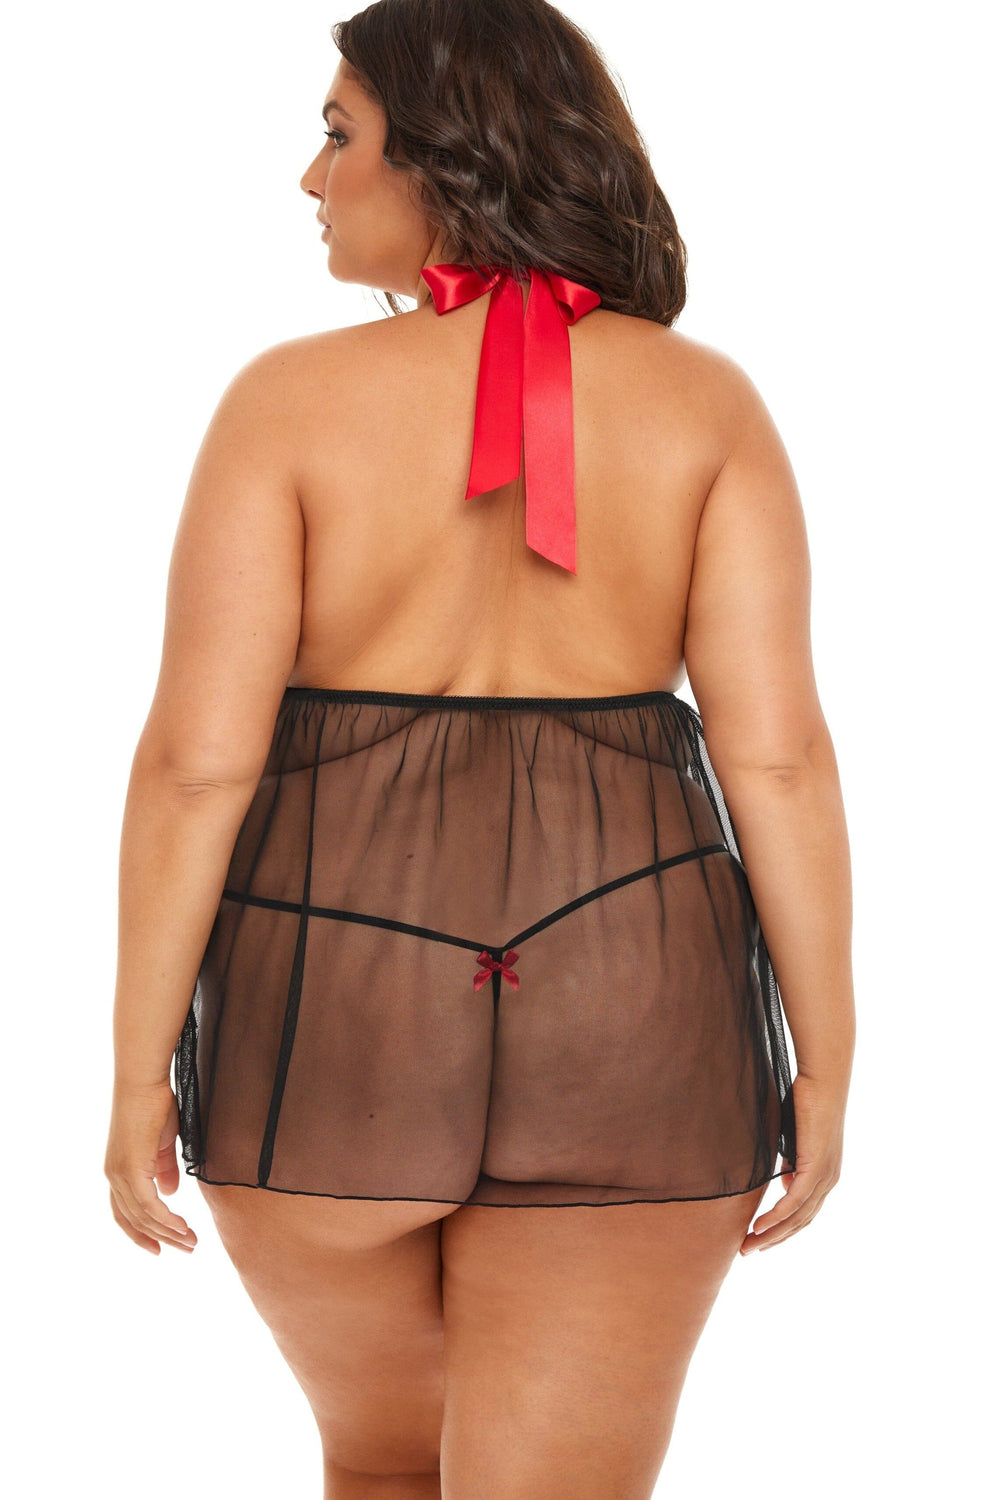 Soft Cup Mesh Babydoll With Functional Halter Ties And Bow Details-Babydolls-Oh La La Cheri-Black-Q-SEXYSHOES.COM